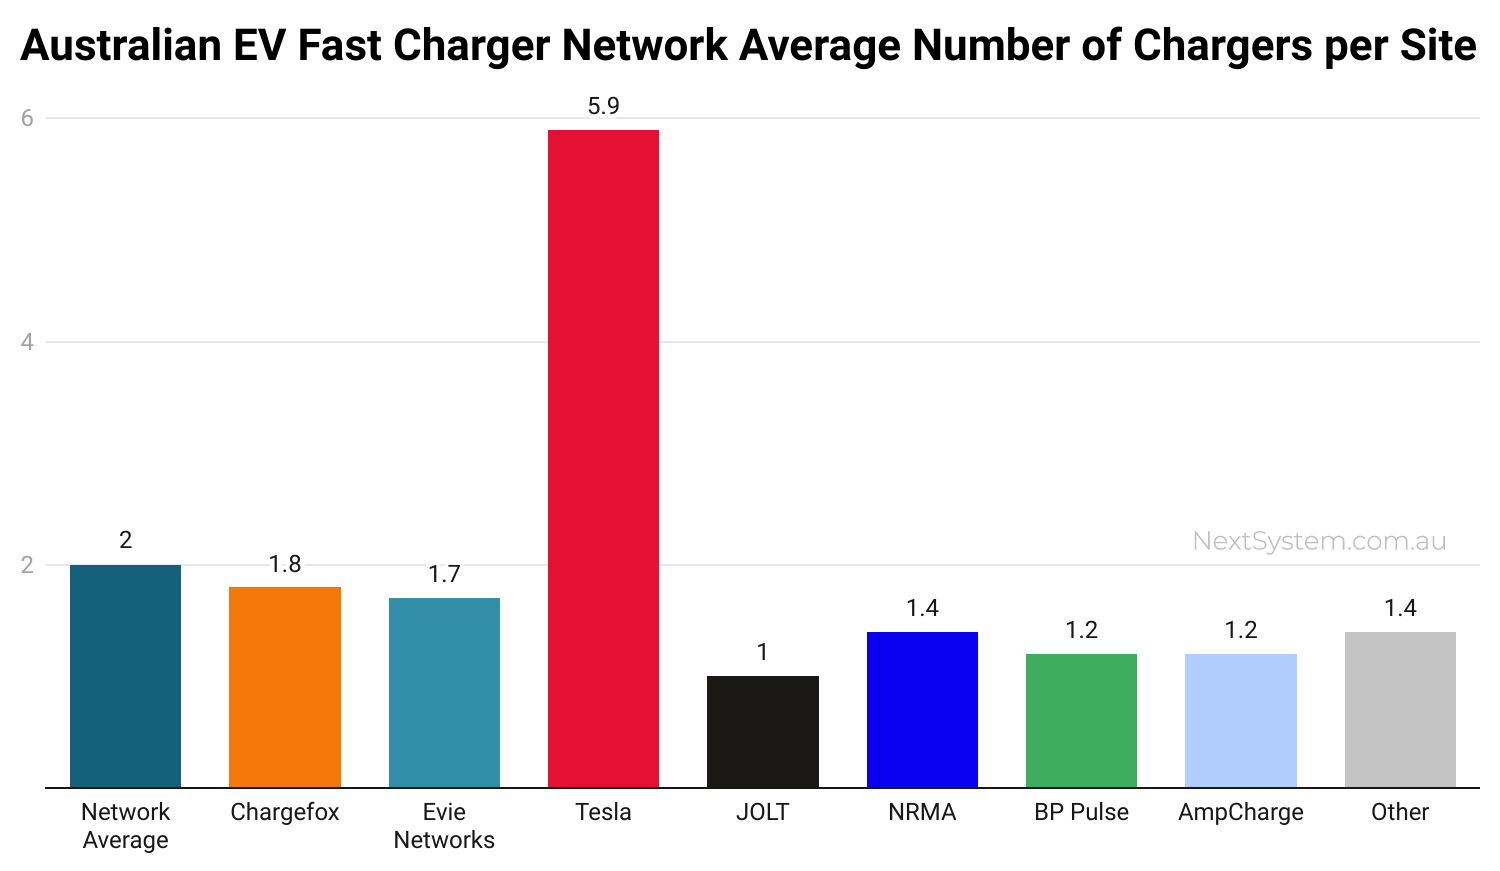 Australian EV Fast Charger Network Average Number of Chargers per Site